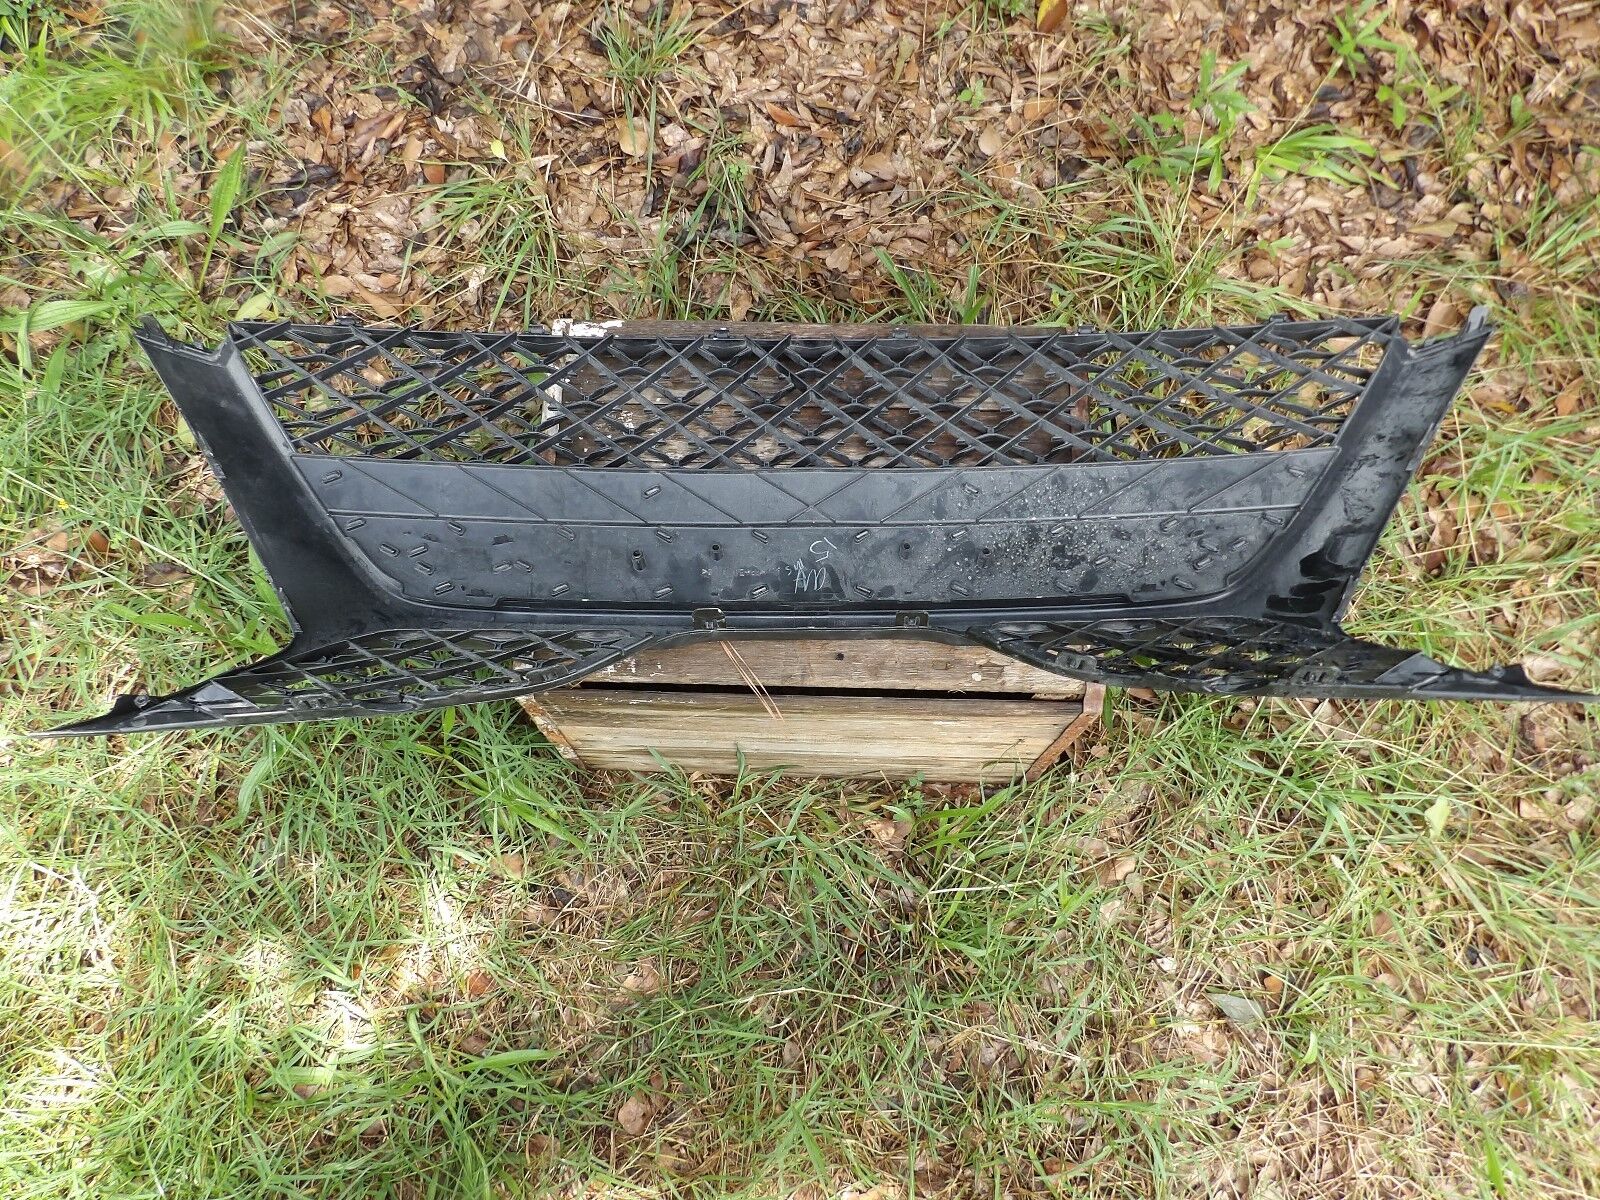 18 2018 TOYOTA CAMRY FRONT RADIATOR LOWER GRILL GRILLE 53113-06130 OEM